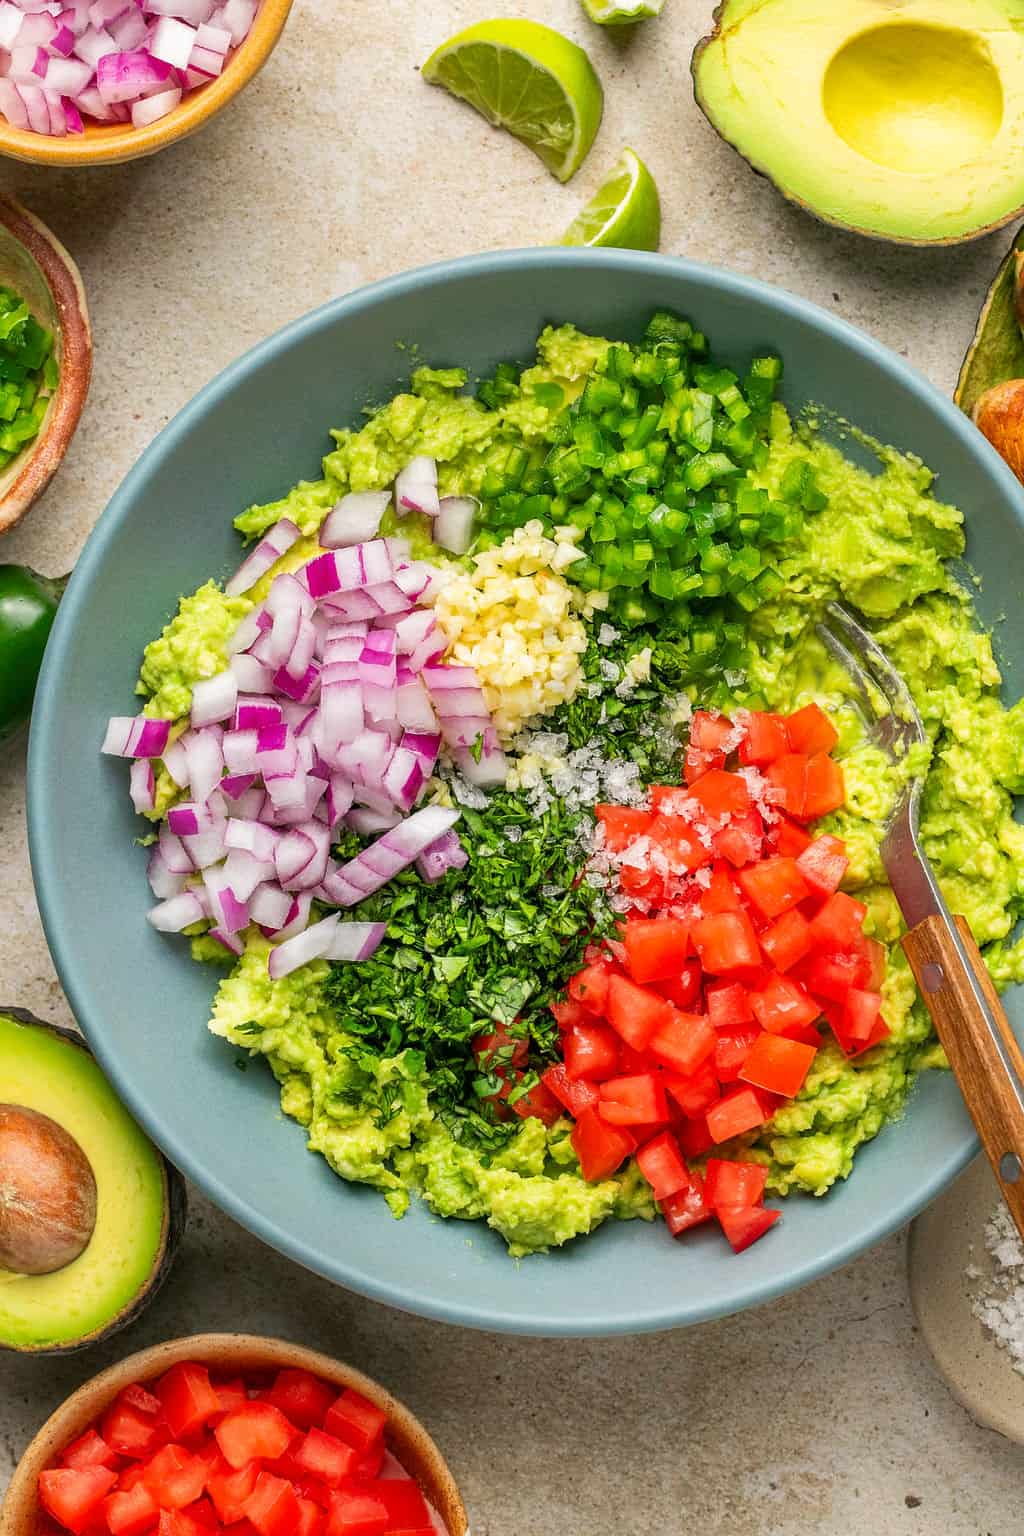 mashed avocado in a bowl topped with guacamole ingredients